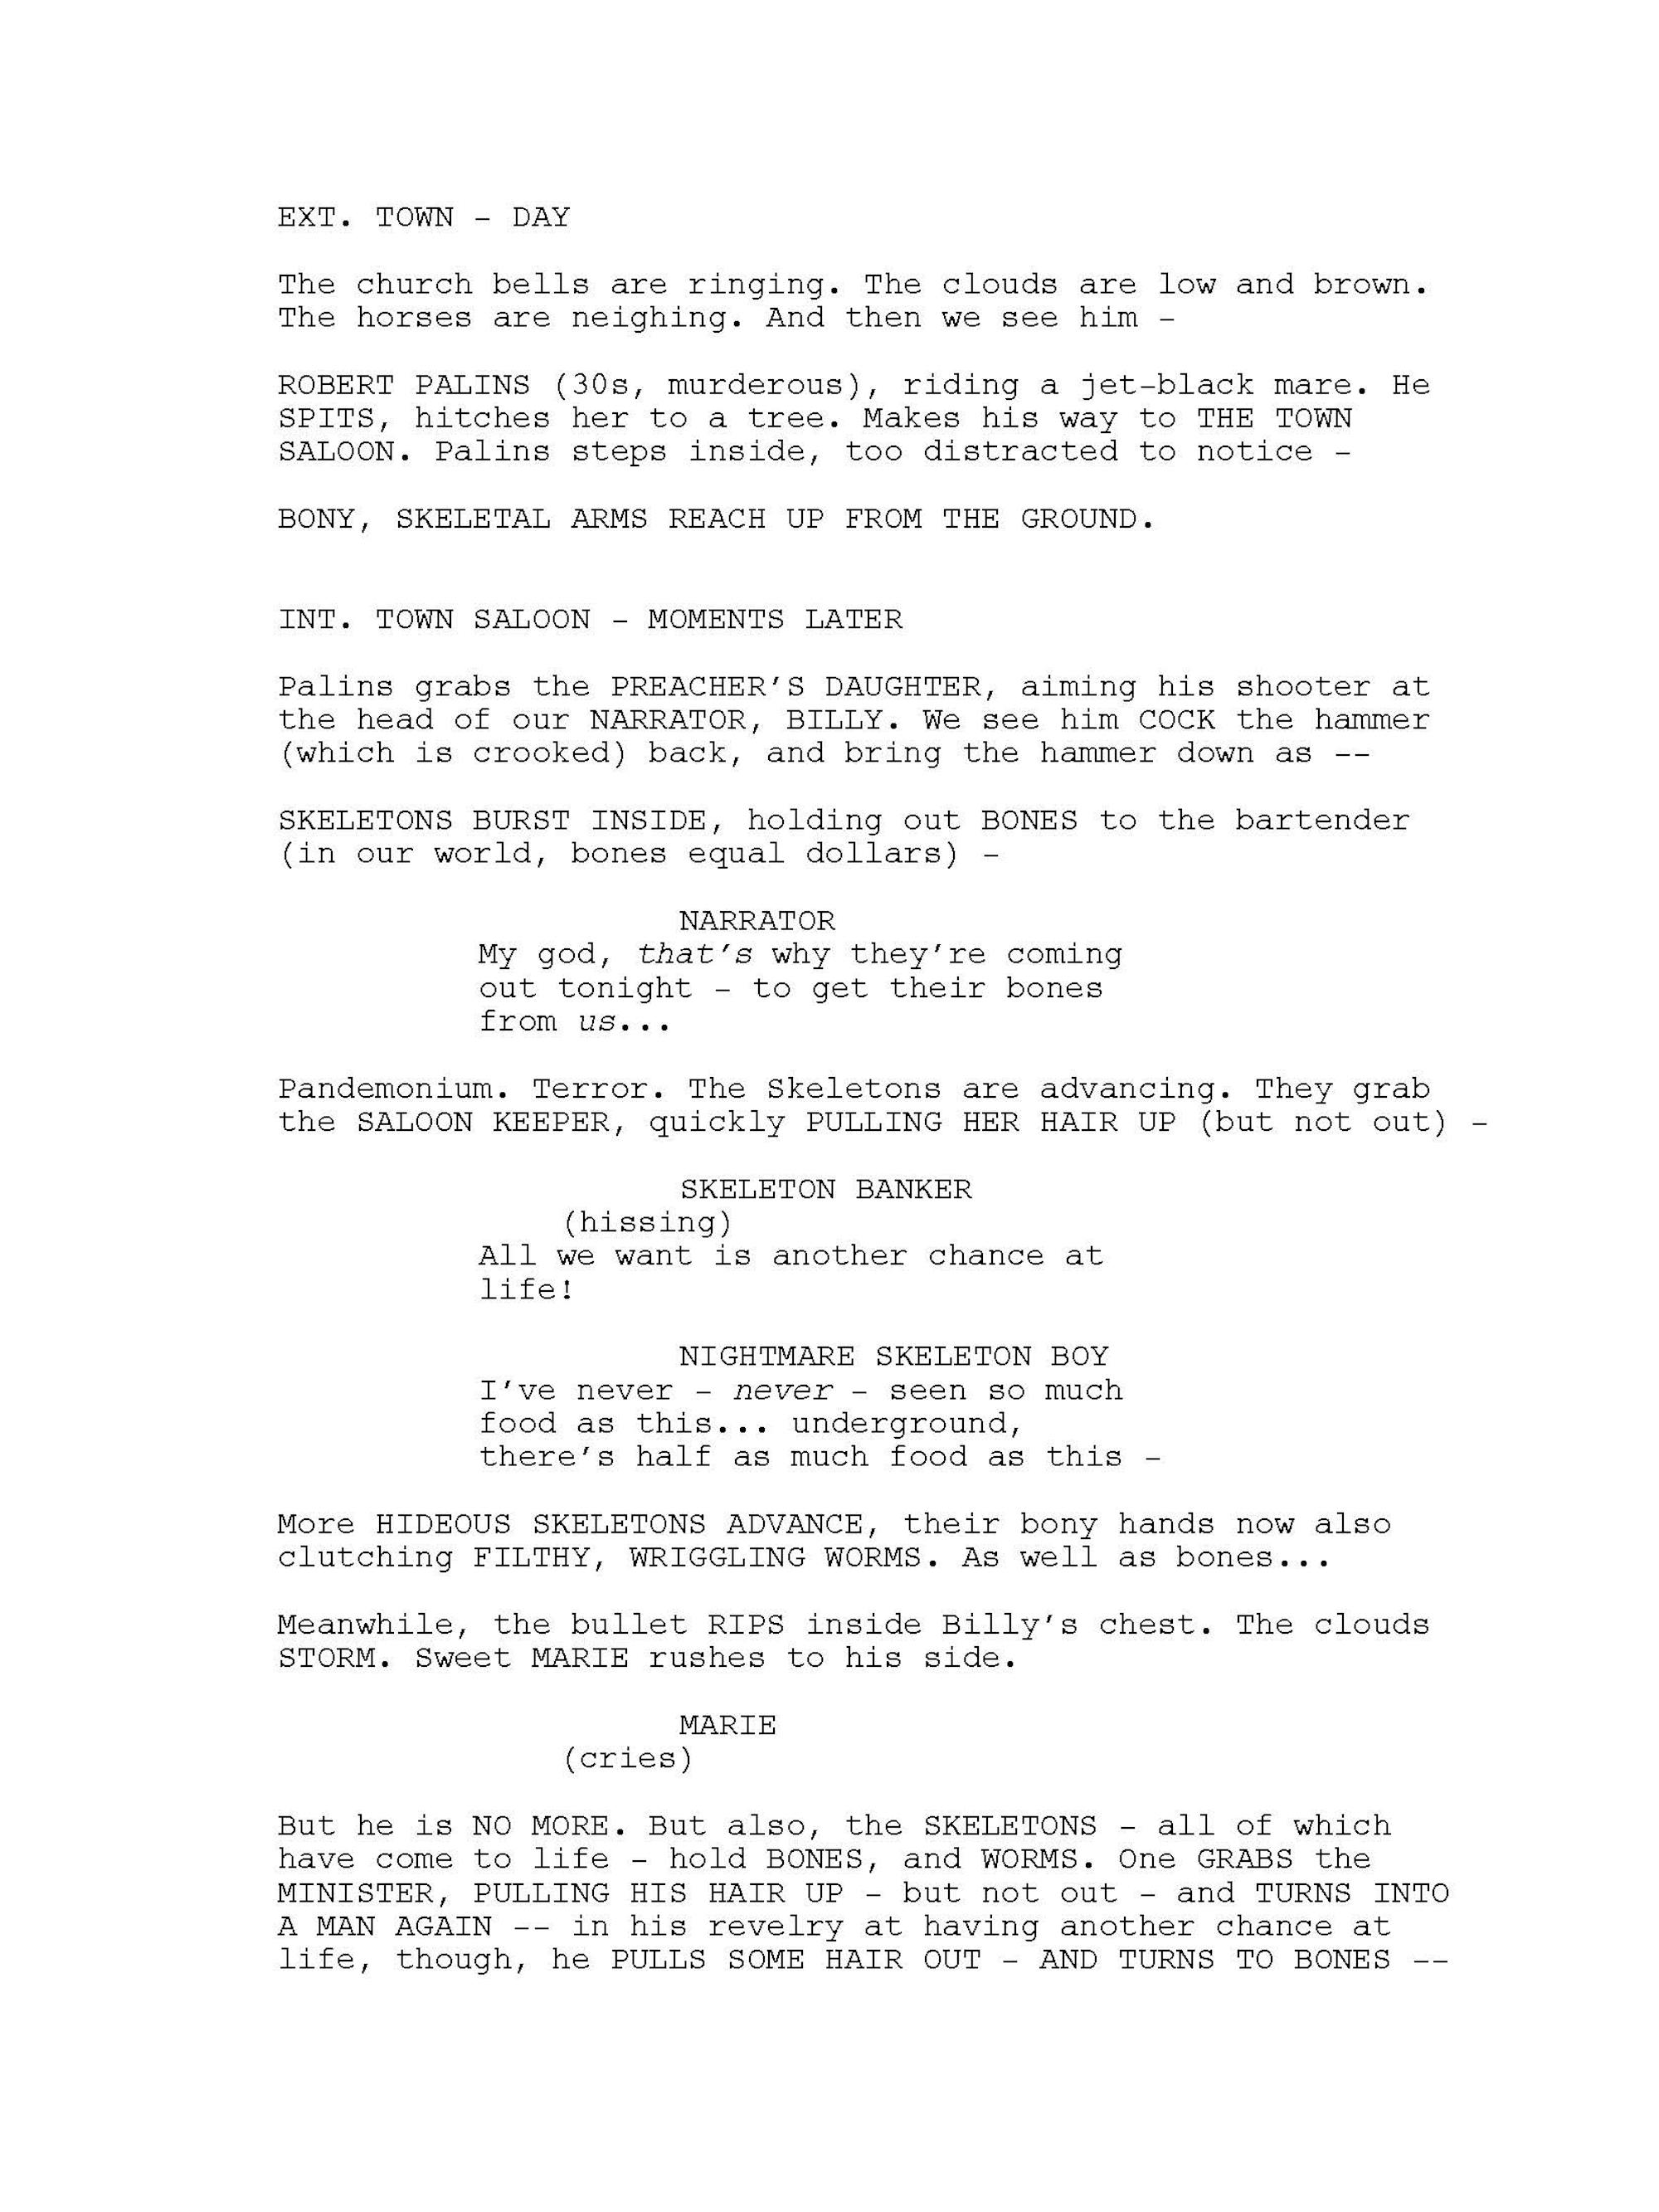 Mike Flanagan's script for The Haunting of Skeleton Town.